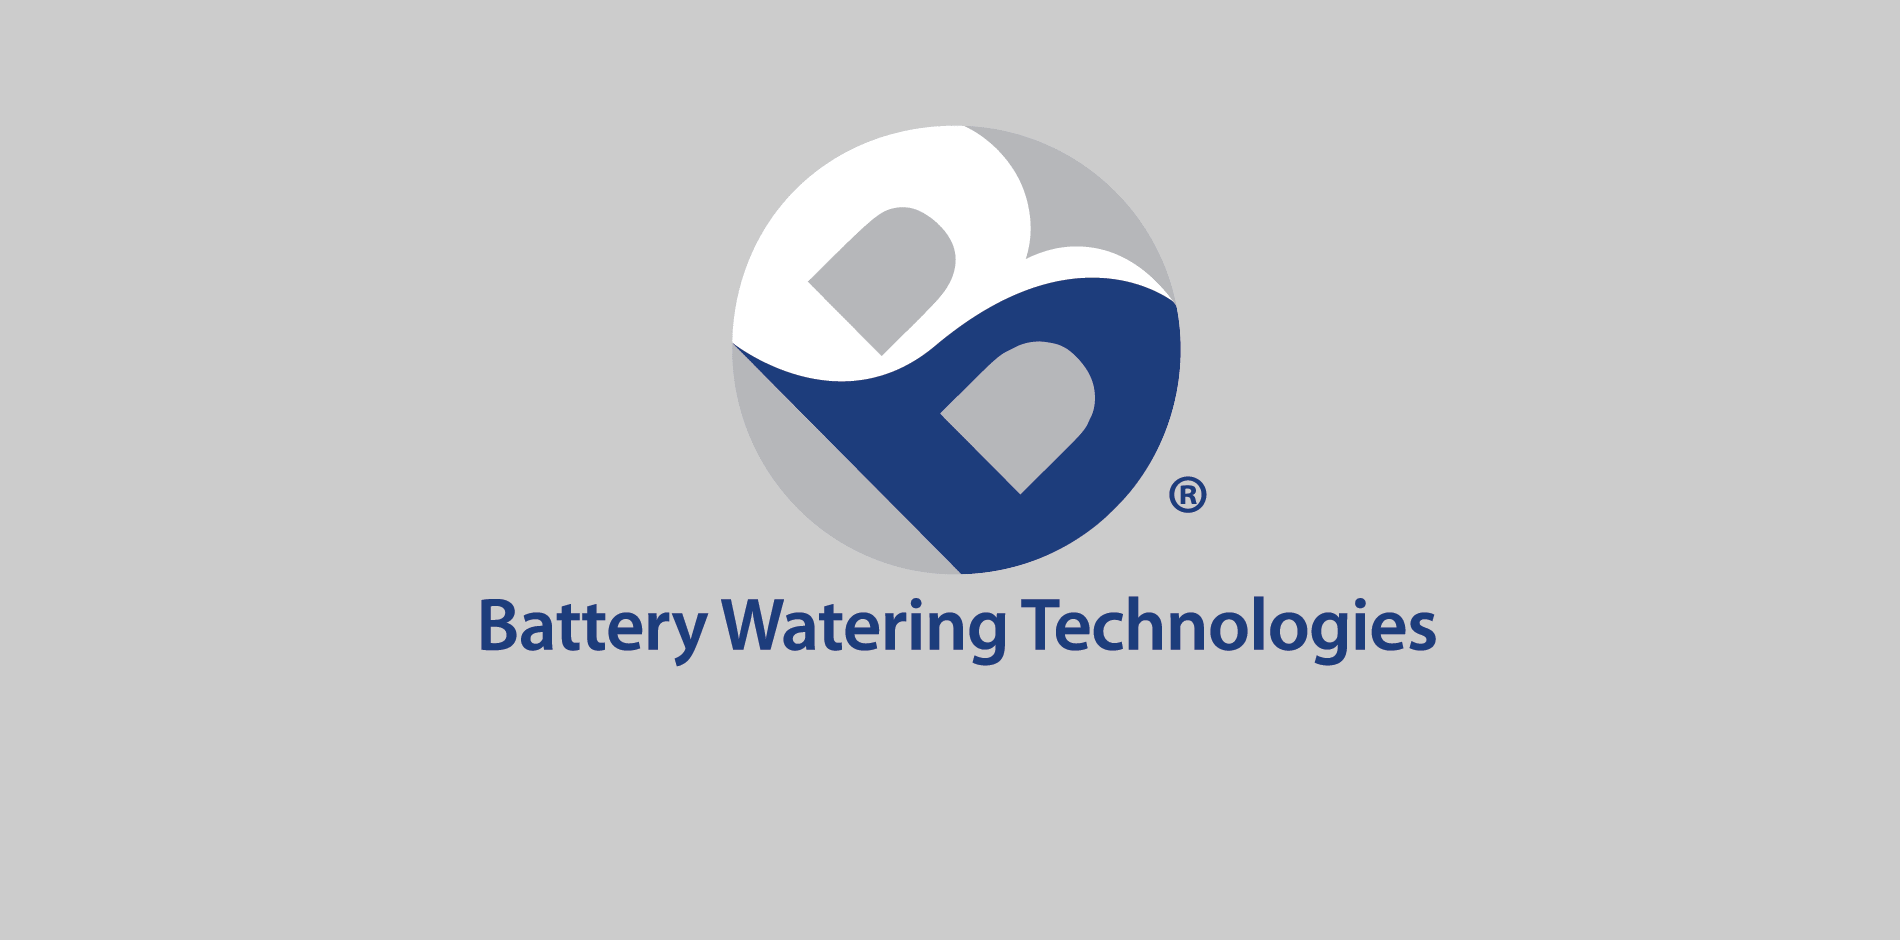 Battery Watering Technologies Brand Page Logo